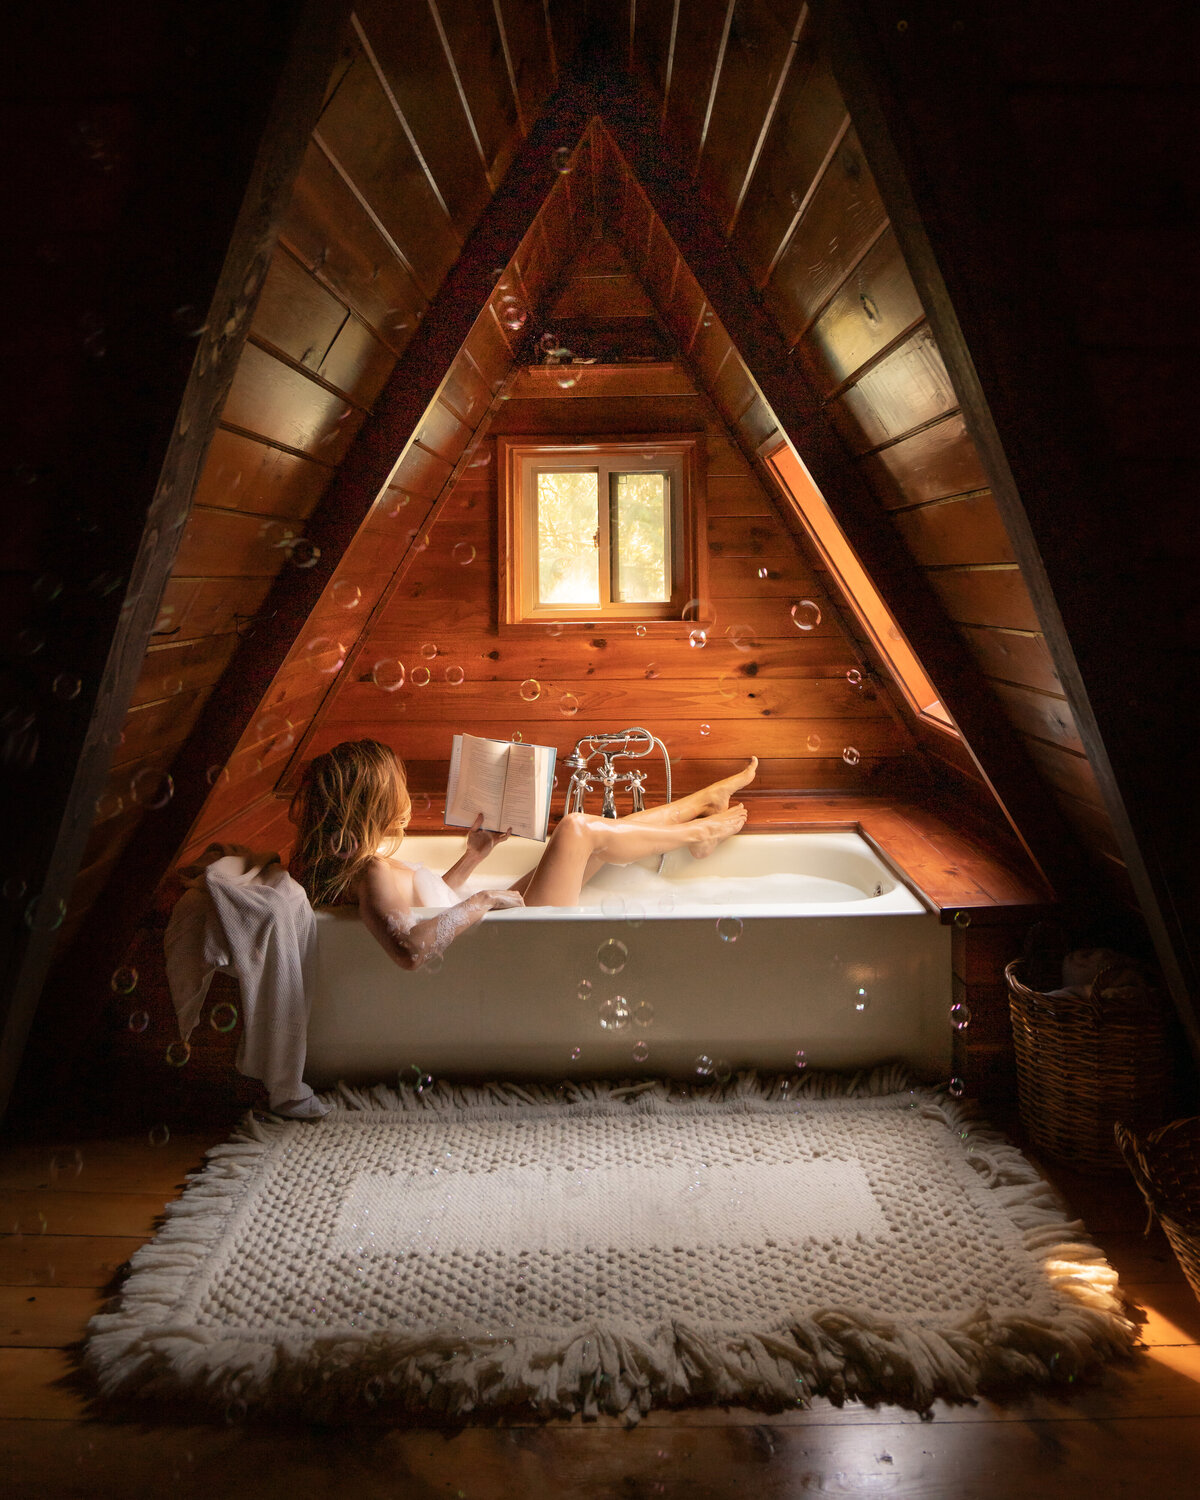 Woman lying in bathtub reading a book in an a-frame wooden cabin